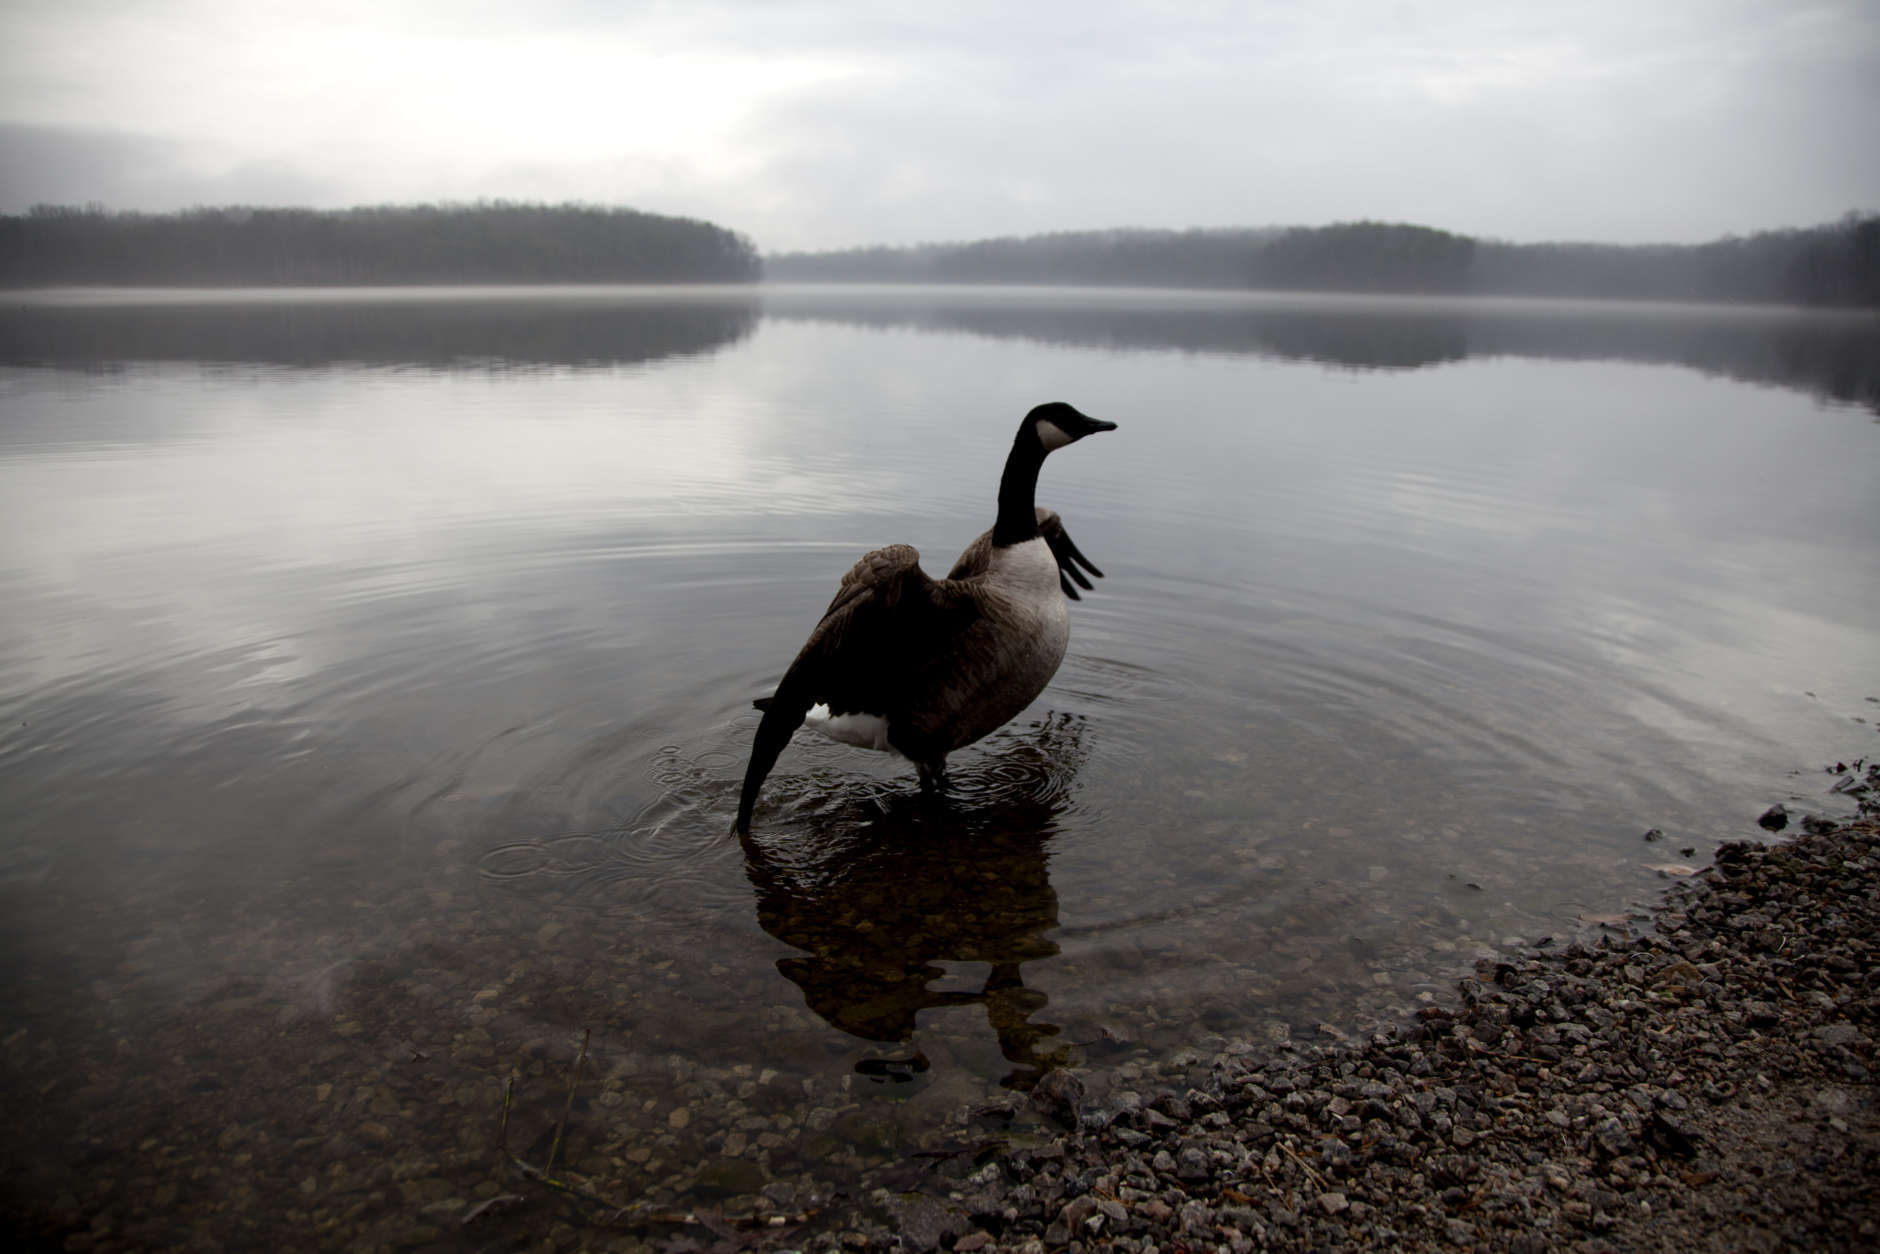 A lone Canada Goose stretches its wings on the shore of a glassy-calm Burke Lake in Fairfax Station, Va., Friday, Feb. 24, 2012. (AP Photo/Carolyn Kaster)